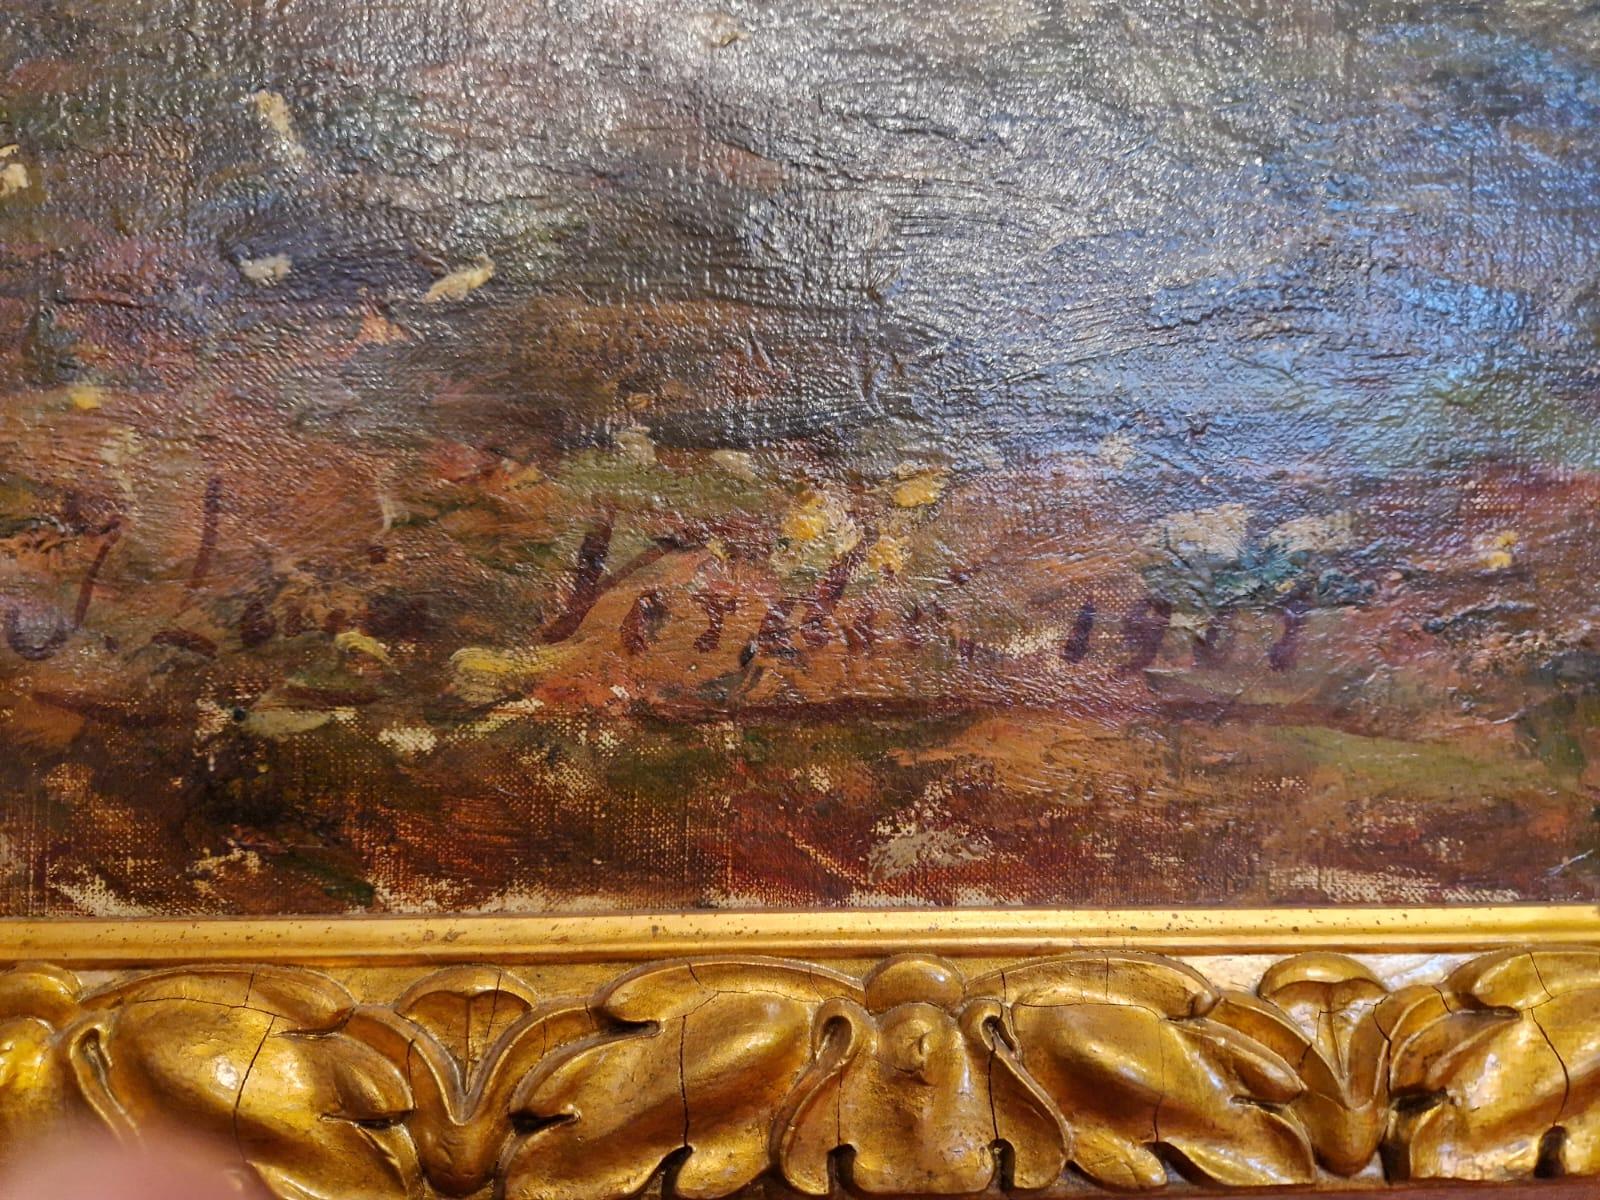 Great Barbizonian Landscape Of JL Verdié
Very large oil on canvas in the style of Barbizon signed Jean-Louis Verdié. This lake landscape typical of paintings of this period bears a copper cartouche mentioning that it was exhibited at the salon of